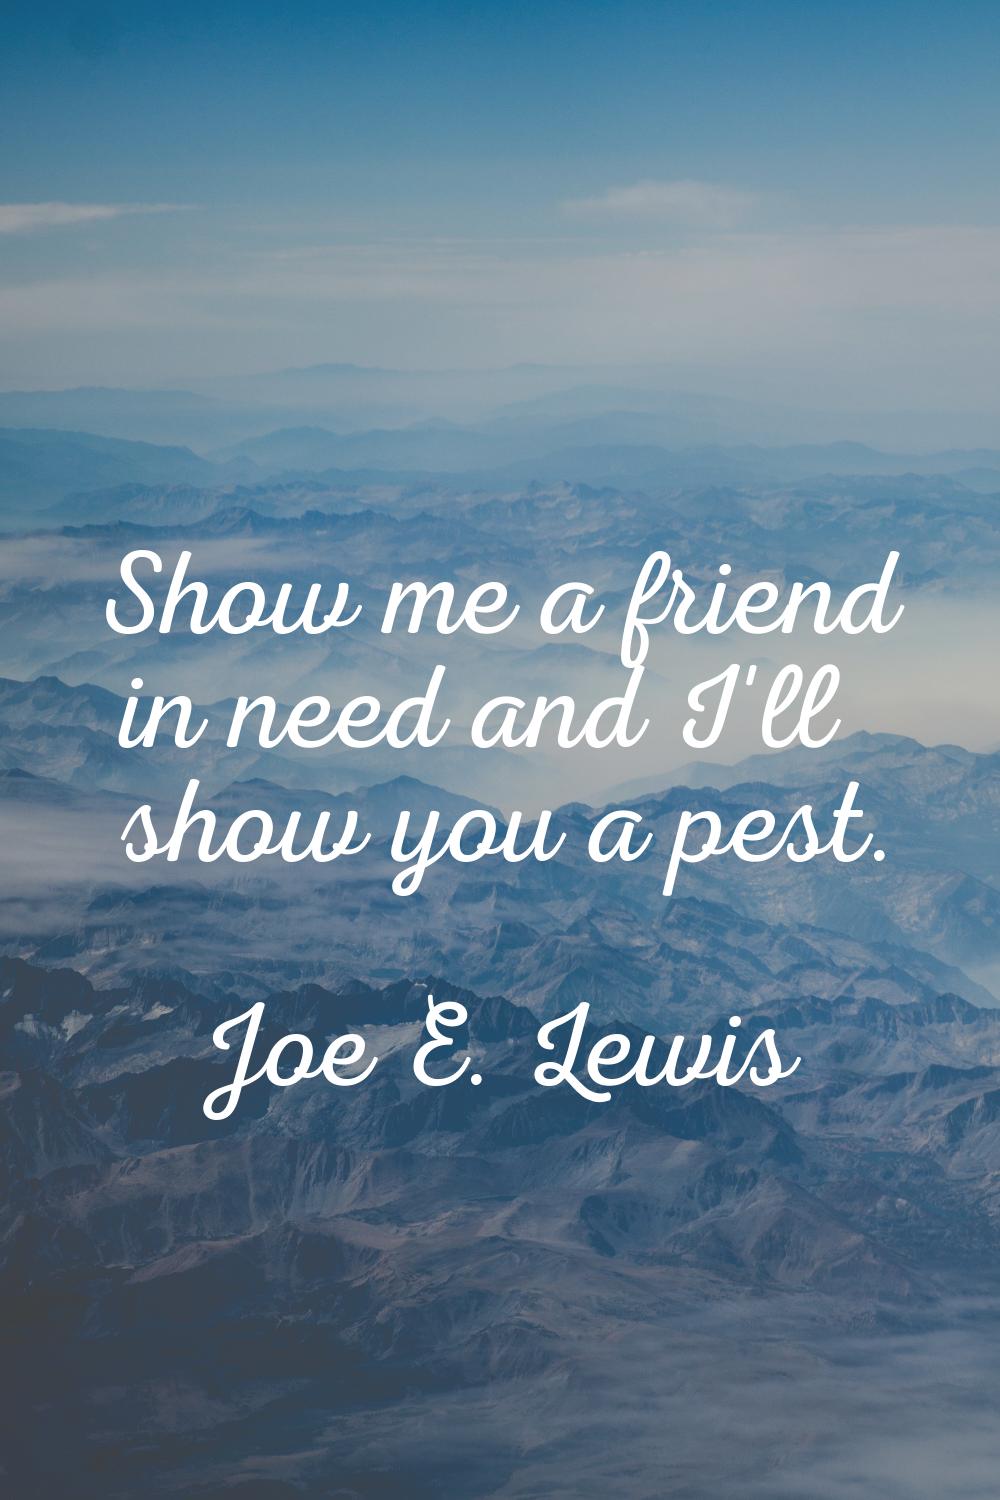 Show me a friend in need and I'll show you a pest.